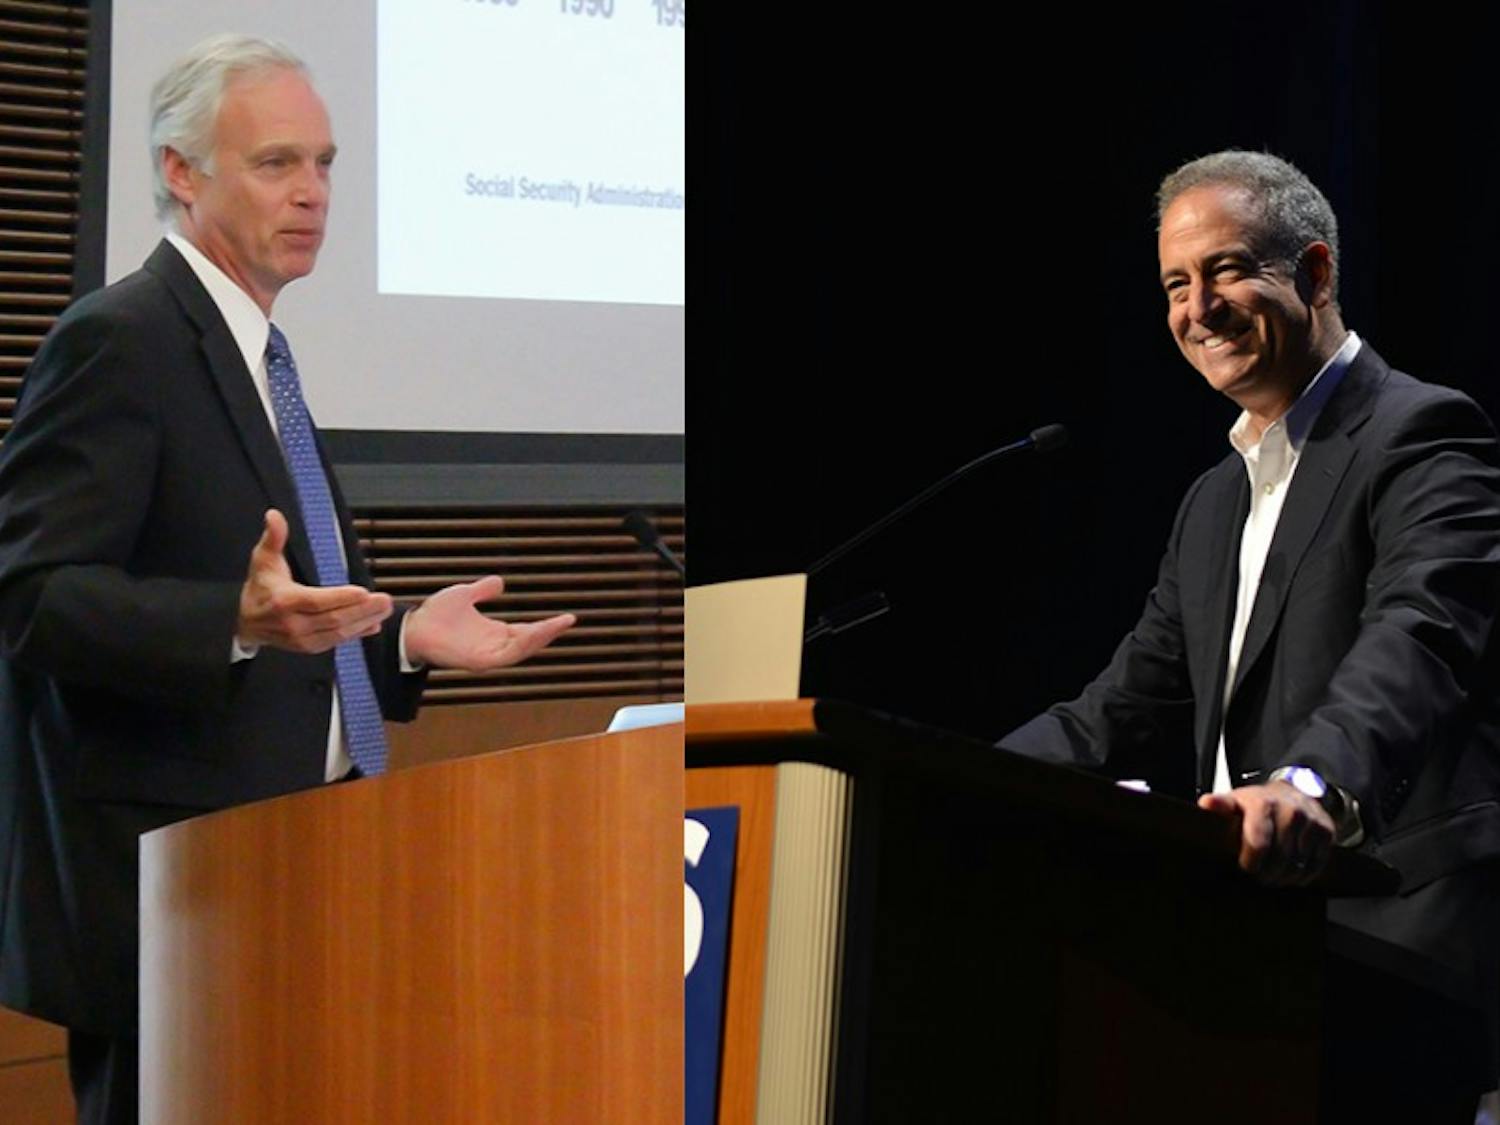 Ron Johnson and Russ Feingold are neck-and-neck in the race for Wisconsin’s U.S. Senate seat.